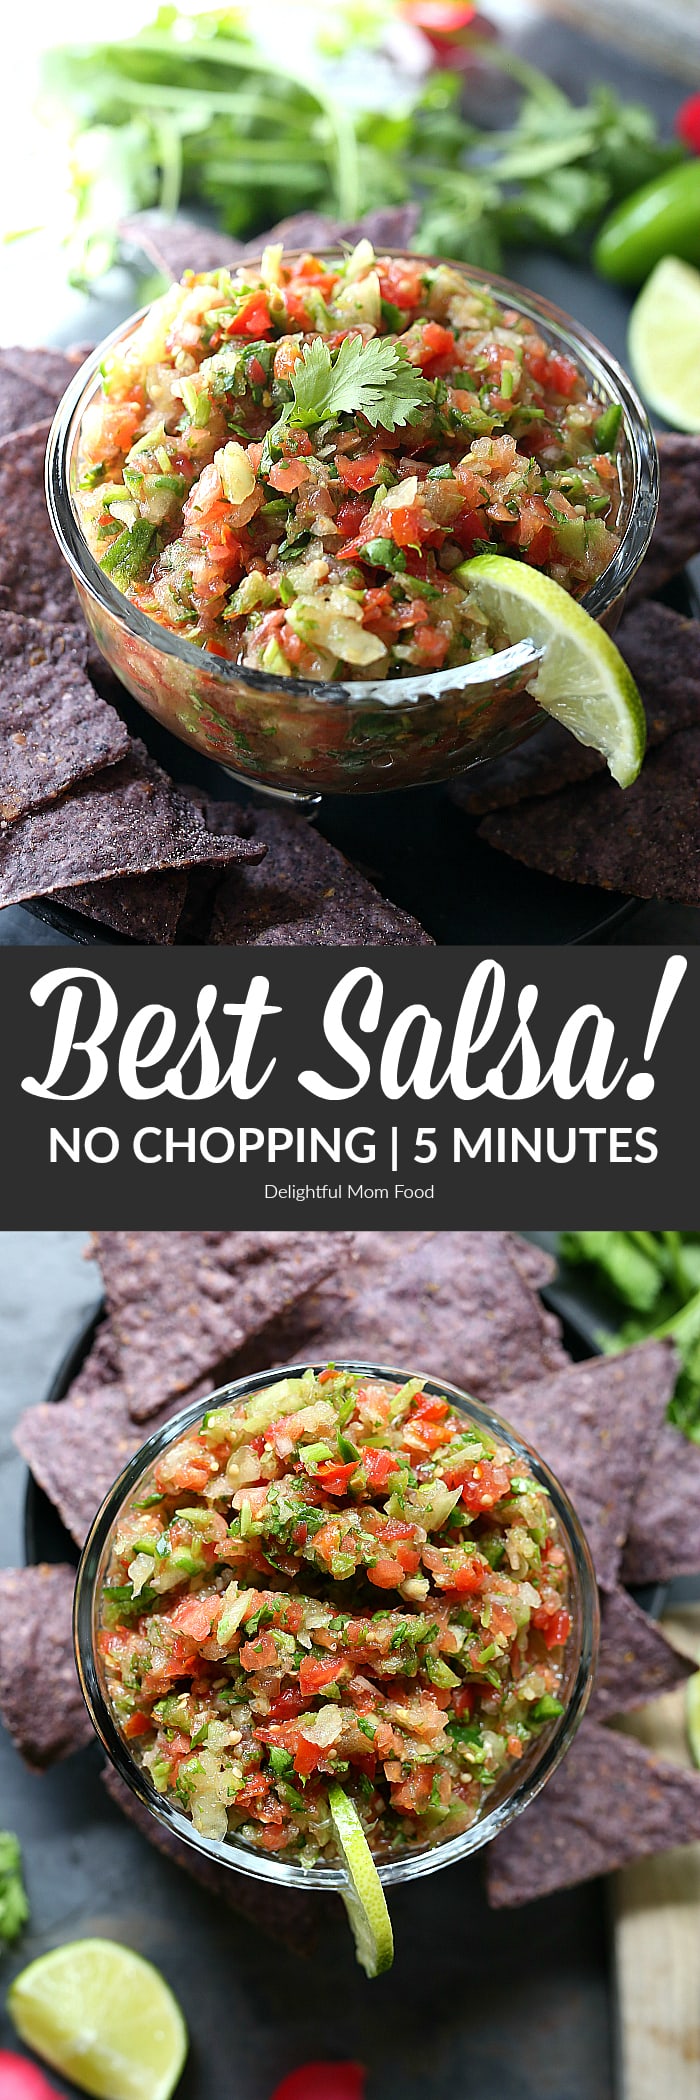 The BEST salsa recipe (no chopping required!) made with fresh tomatillo green tomatoes, red tomatoes, jalapeno pepper and lime juice pulsed into a spicy Mexican cuisine salsa fresca. A quick and easy healthy appetizer or sauce ready in 5 minutes! | #salsa #easy #quick #homemade #tomatillo #tomatoes #recipe #dip #sauce #Mexican #jalapeno #appetizer #snack #dip | Recipe at delightfulmomfood.com